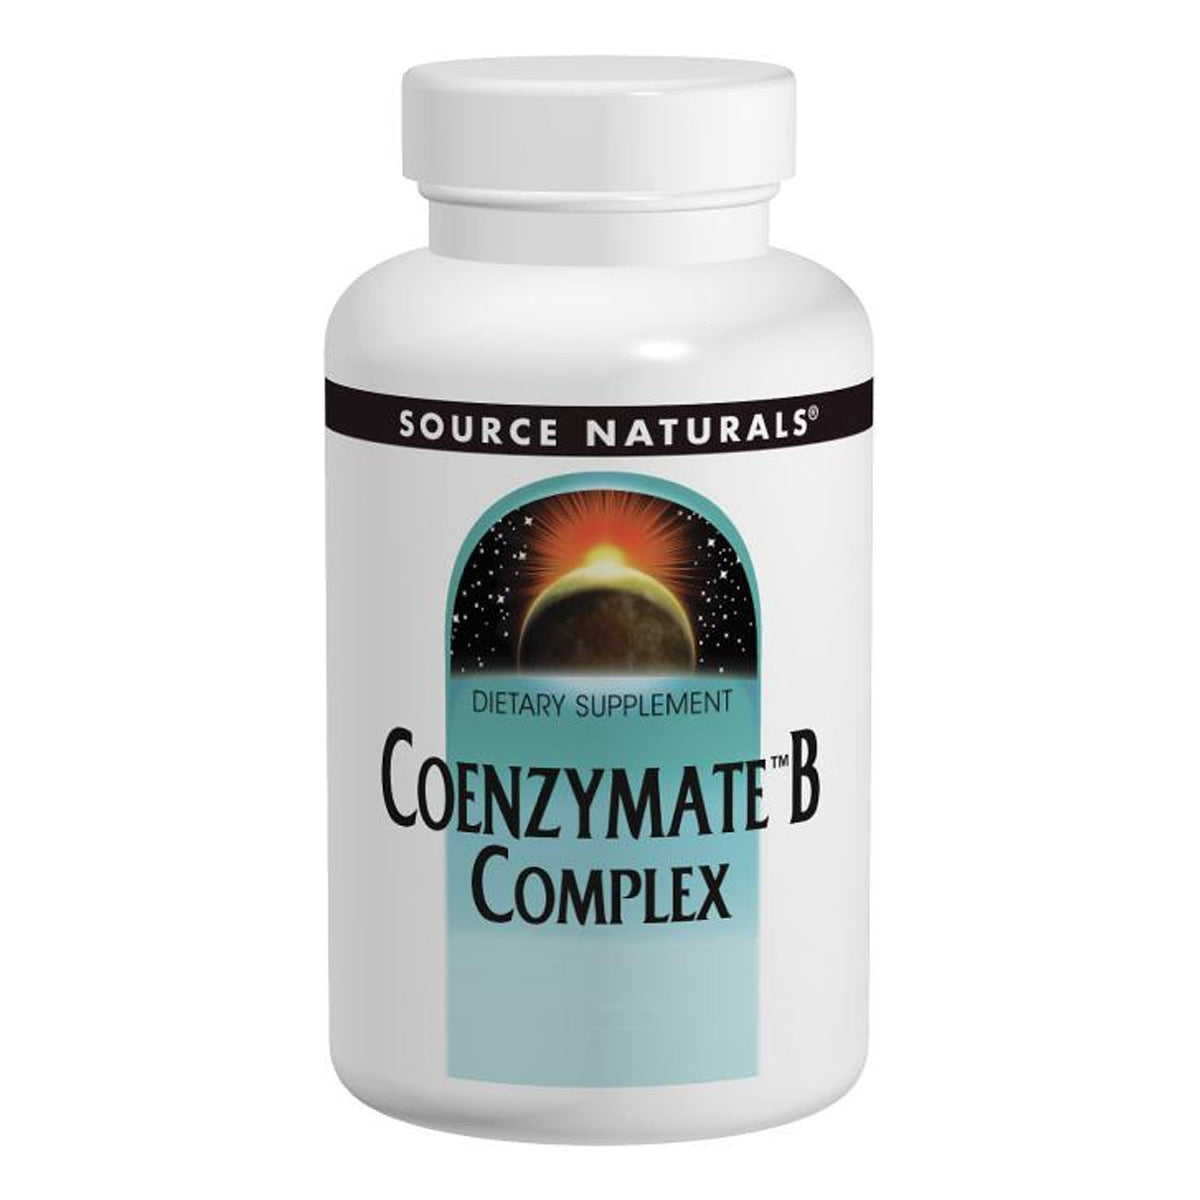 Primary image of Coenzymate B Complex - Peppermint